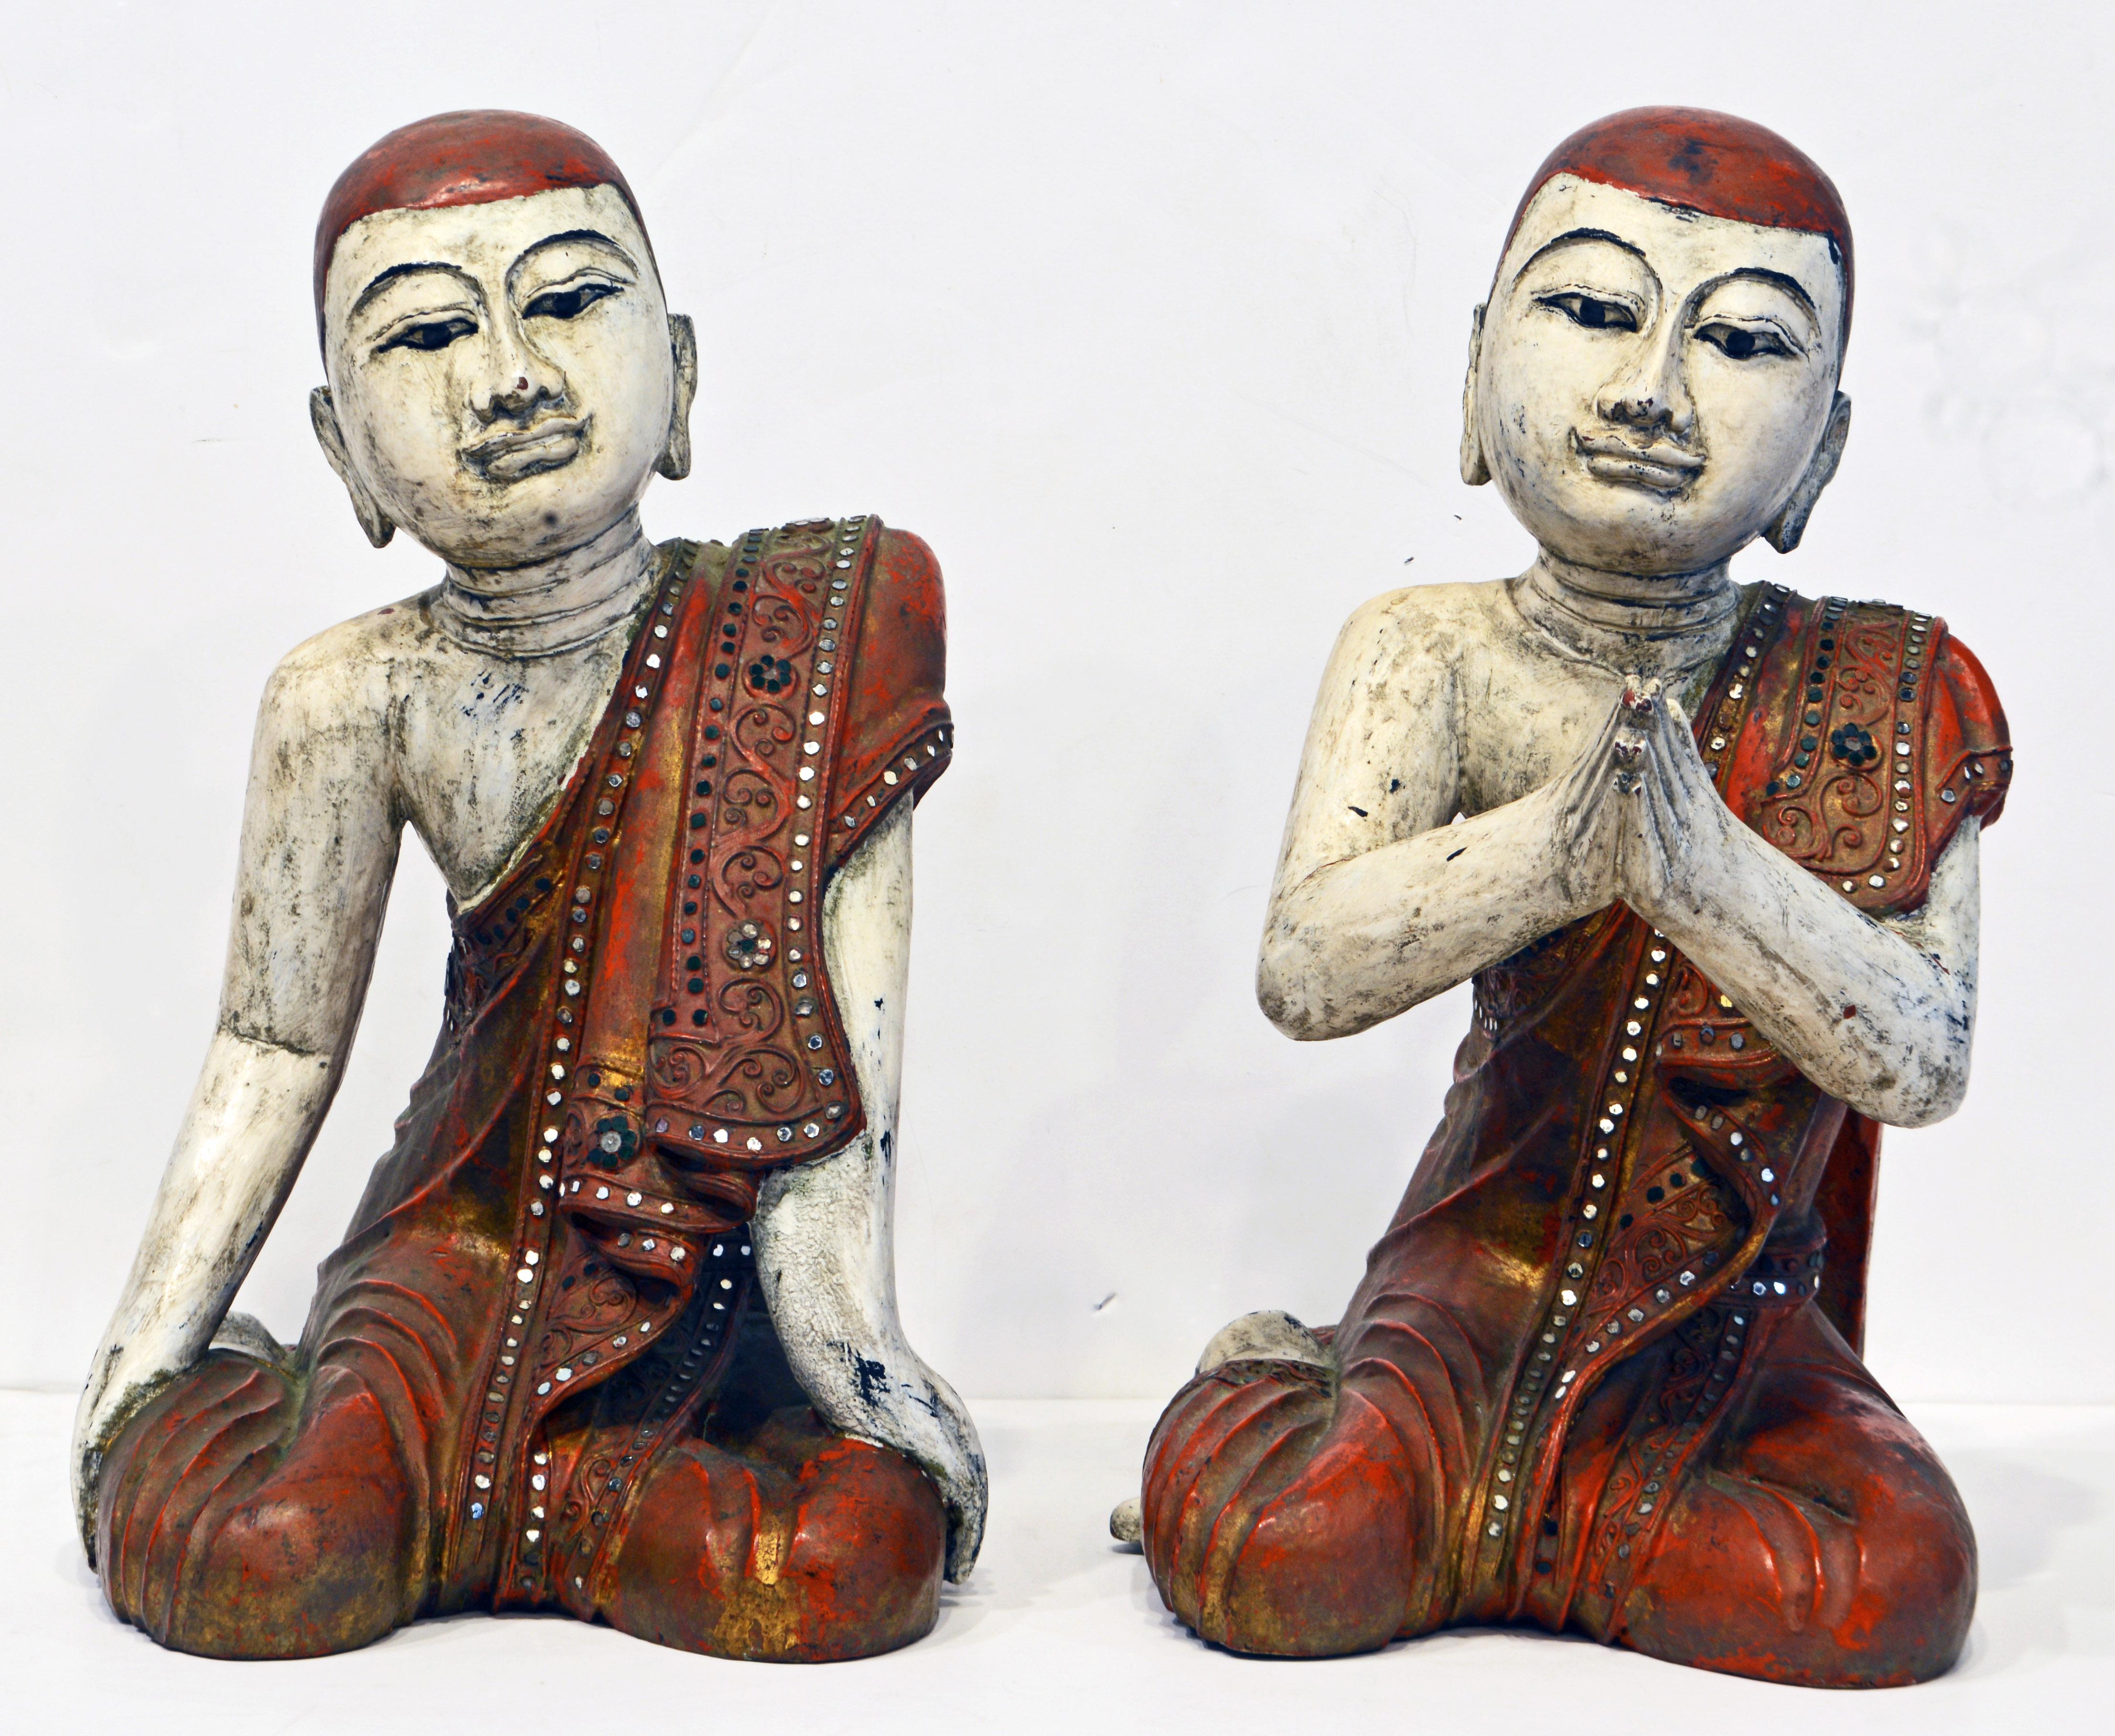 16 inches tall these two Thai or Burmese young monks are carved in wood and painted One monk is sitting in a praying position, the other with a relaxed but still devoted posture. They wear beautifully glass bejeweled red robes with inlay and